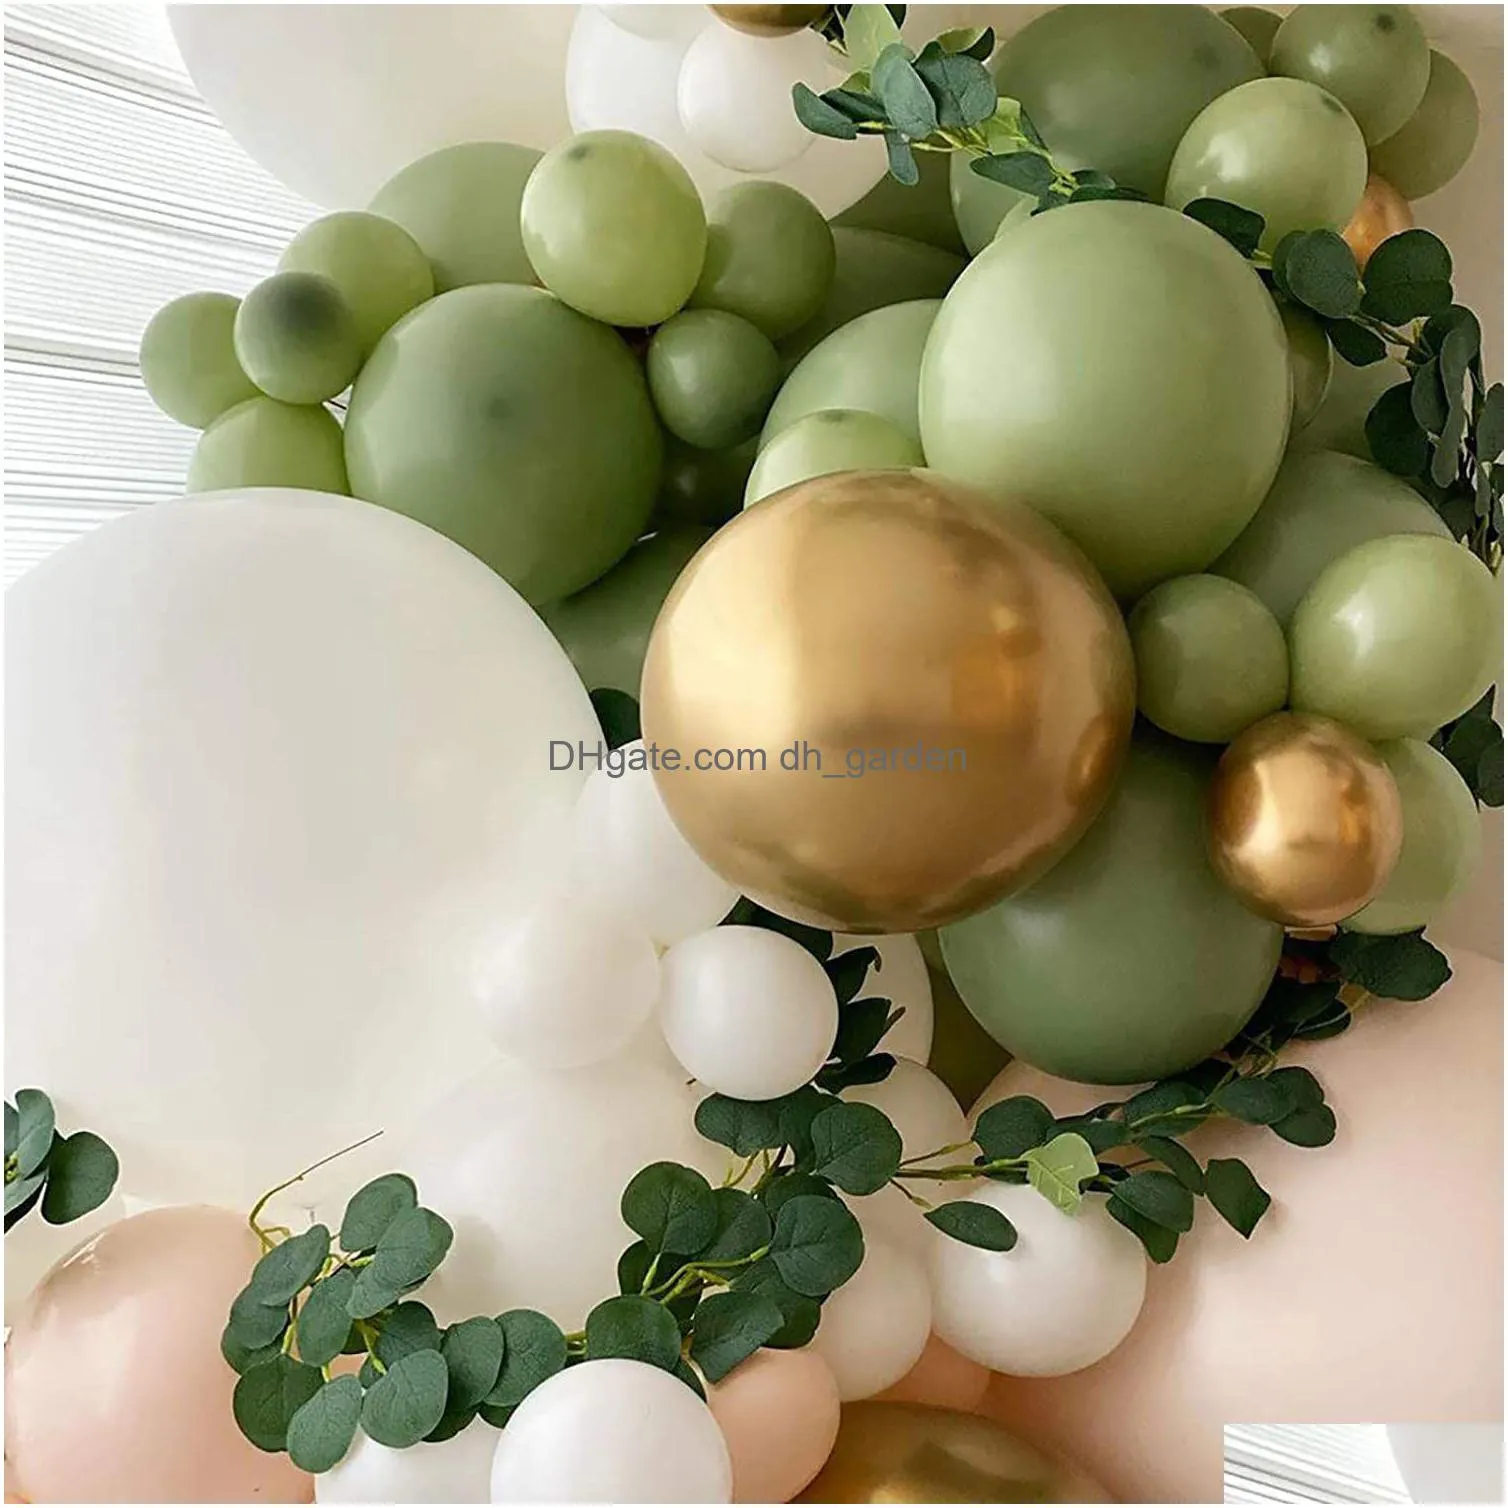 Other Event Party Supplies Christmas New Avocado Green Retro Series Balloon Package Dousha Birthday Decoration Chain Set D Dhgarden Dhlpv